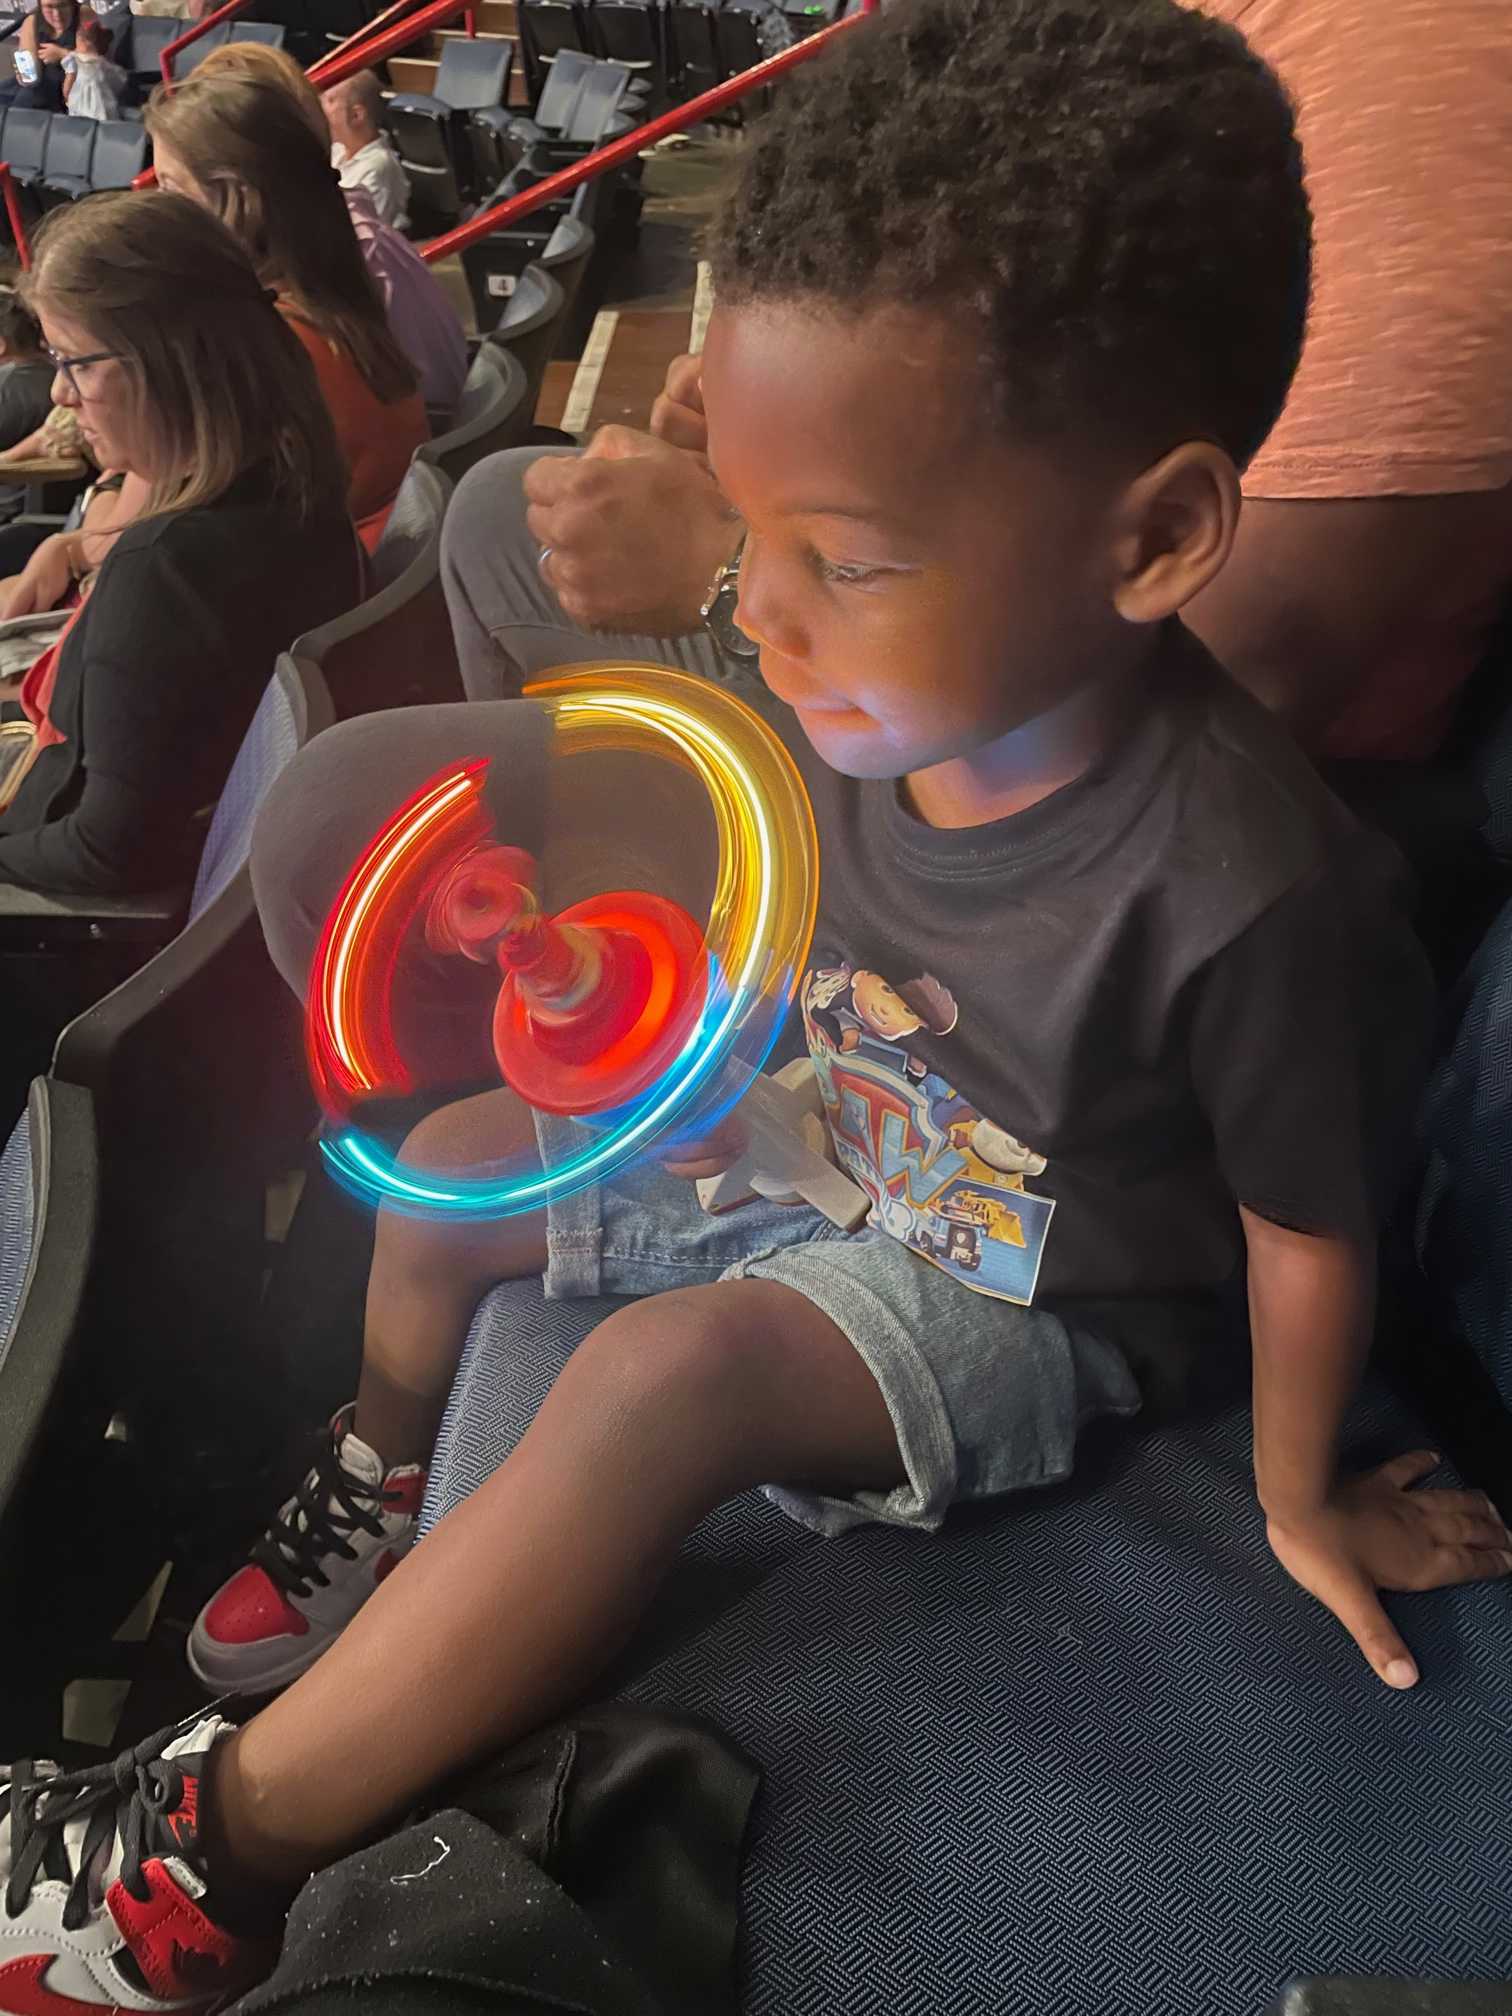 Kids love the light up souvenirs at the live shows!